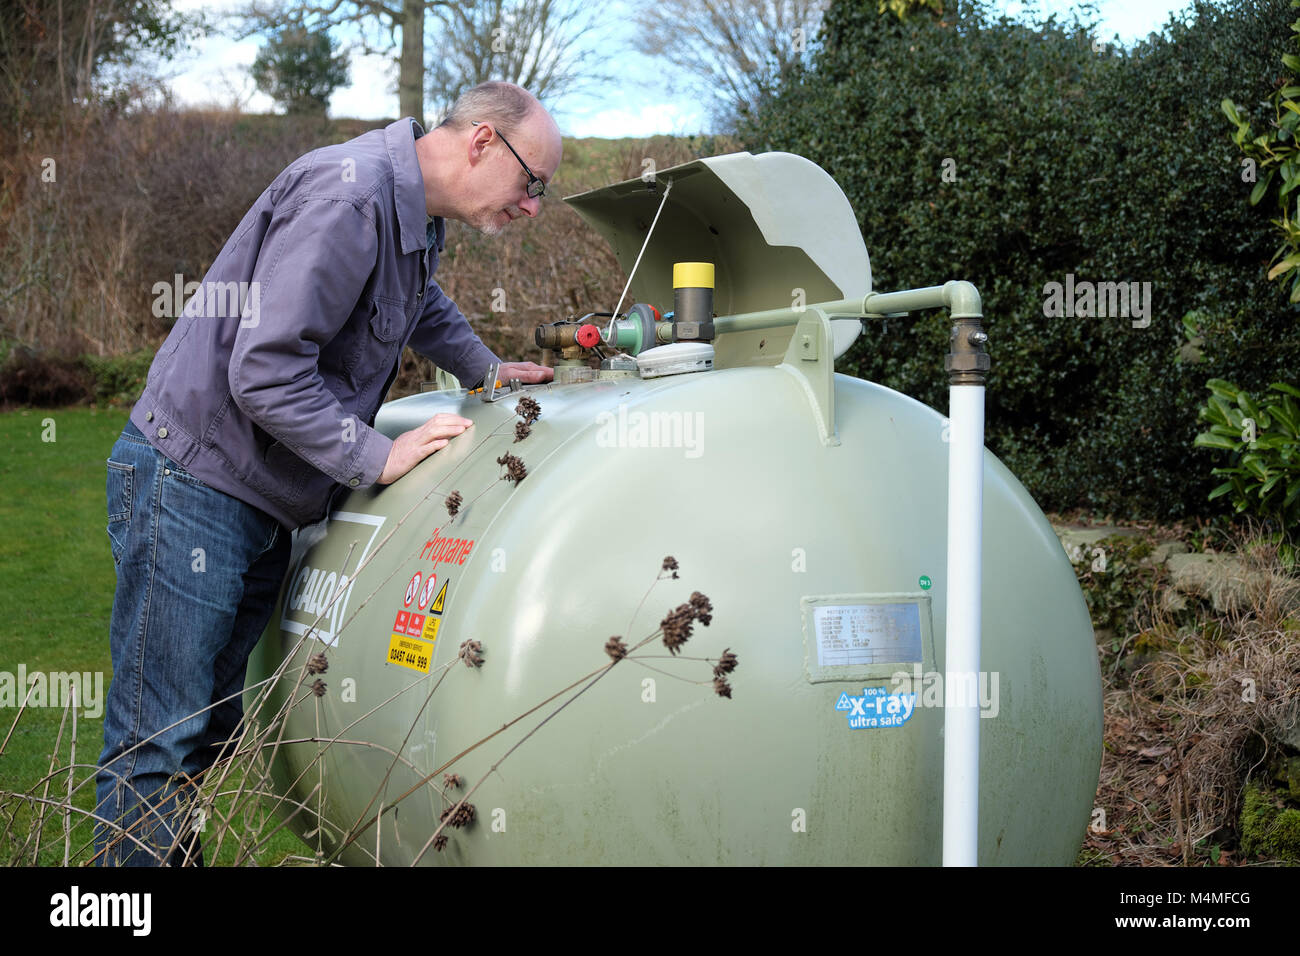 Calor gas male customer reading the capacity meter gauge in a rural UK setting Stock Photo